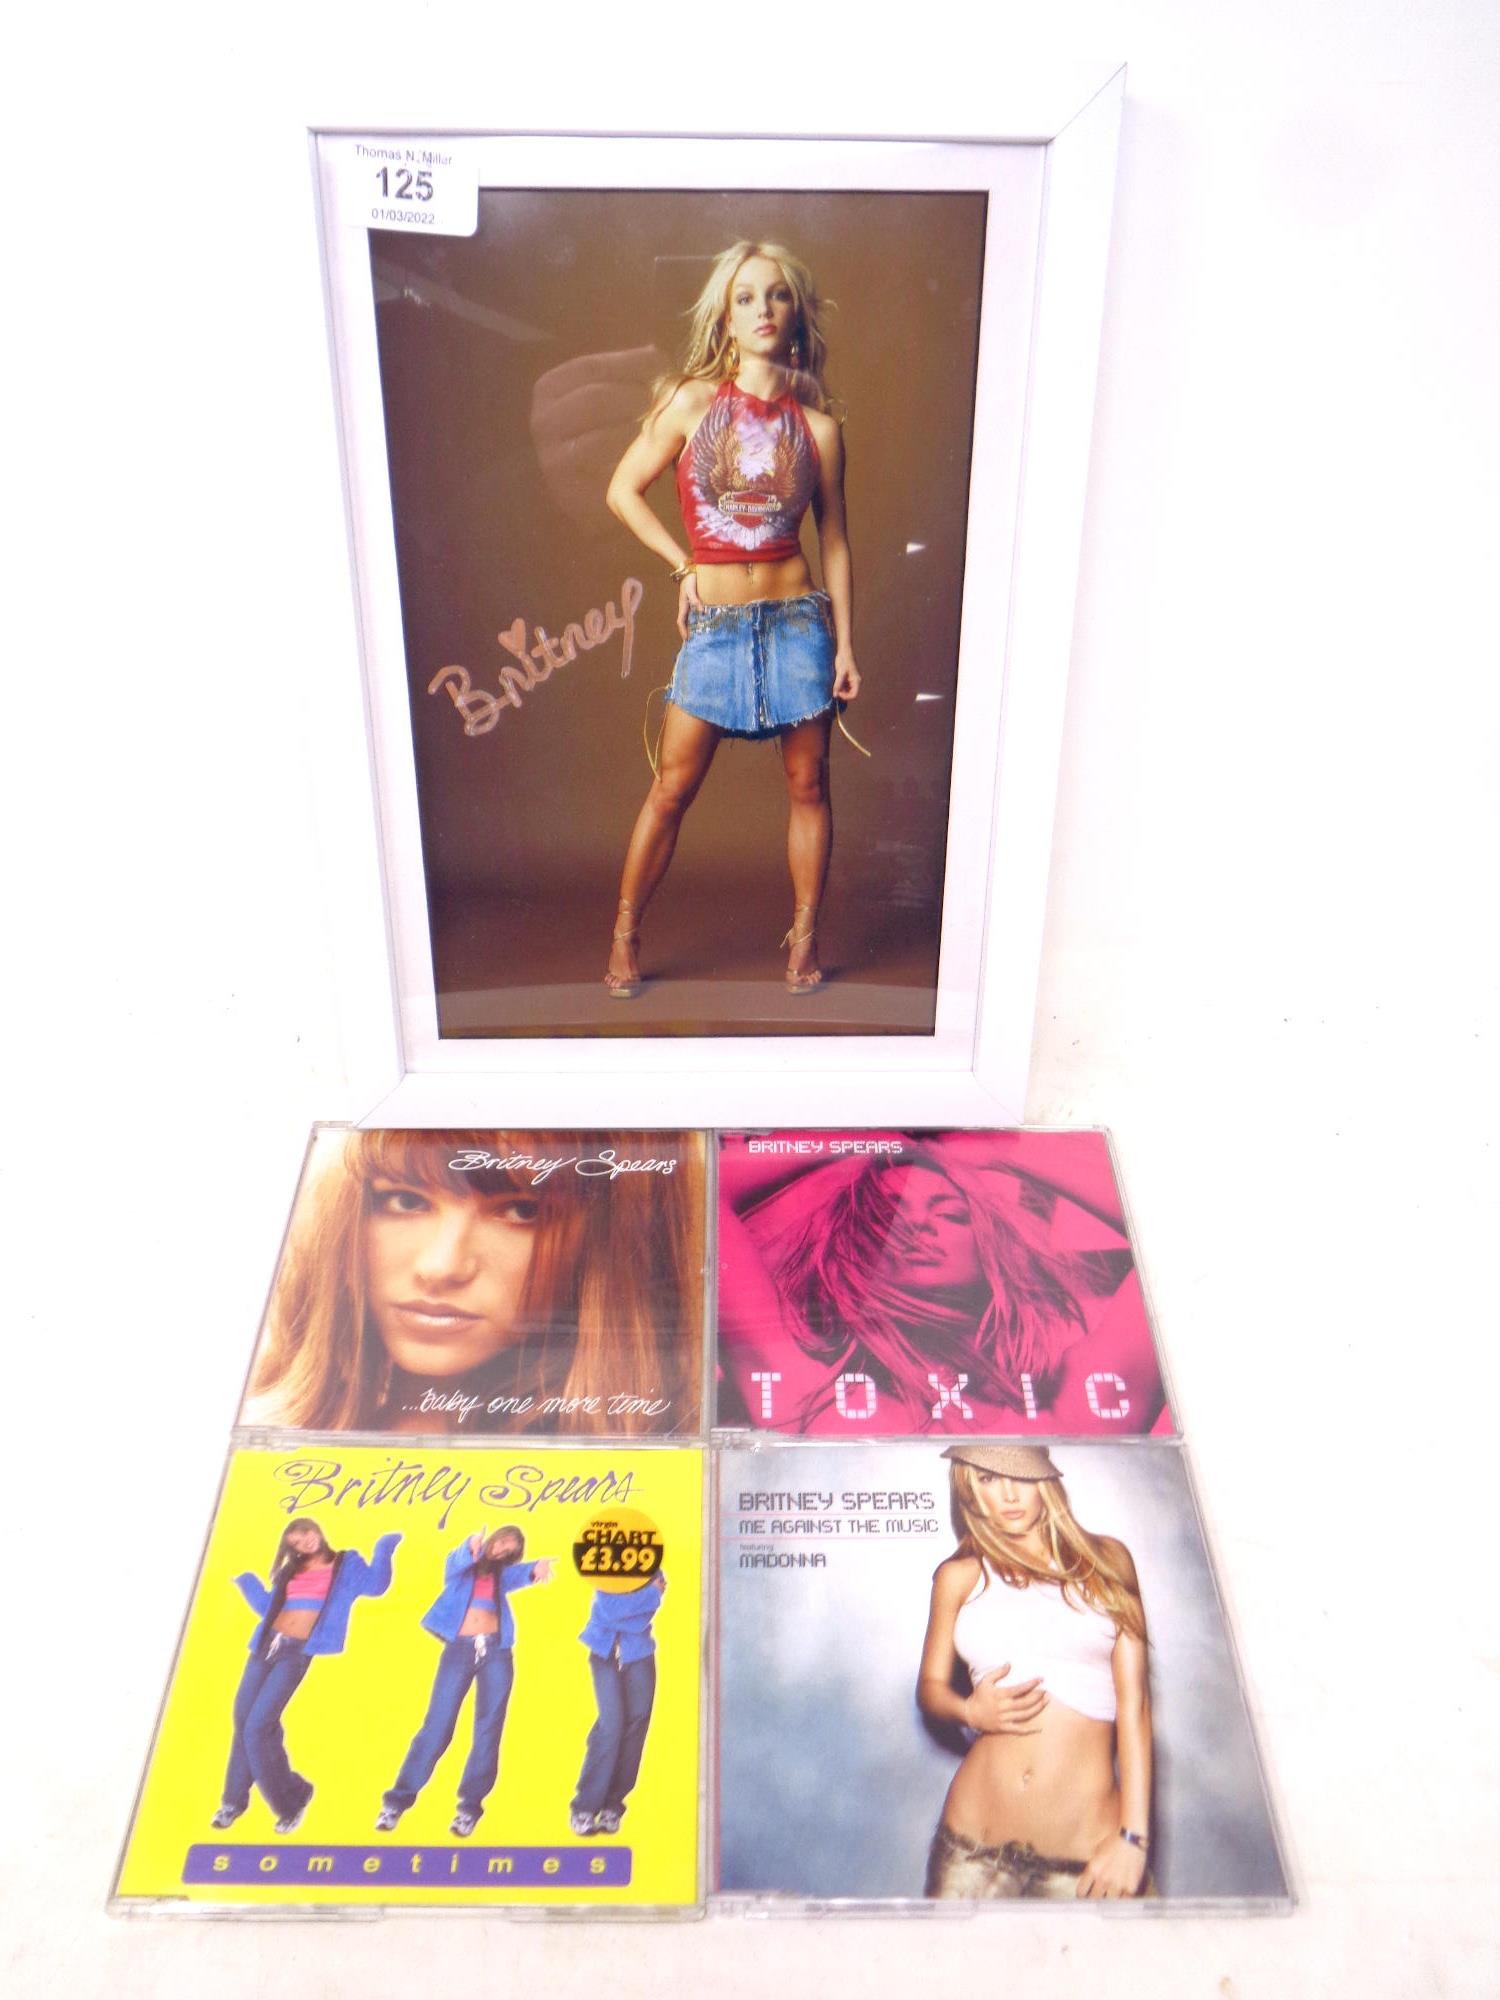 Britney Spears signed photo, mounted and framed, with cd singles - Baby one more time, Sometimes,